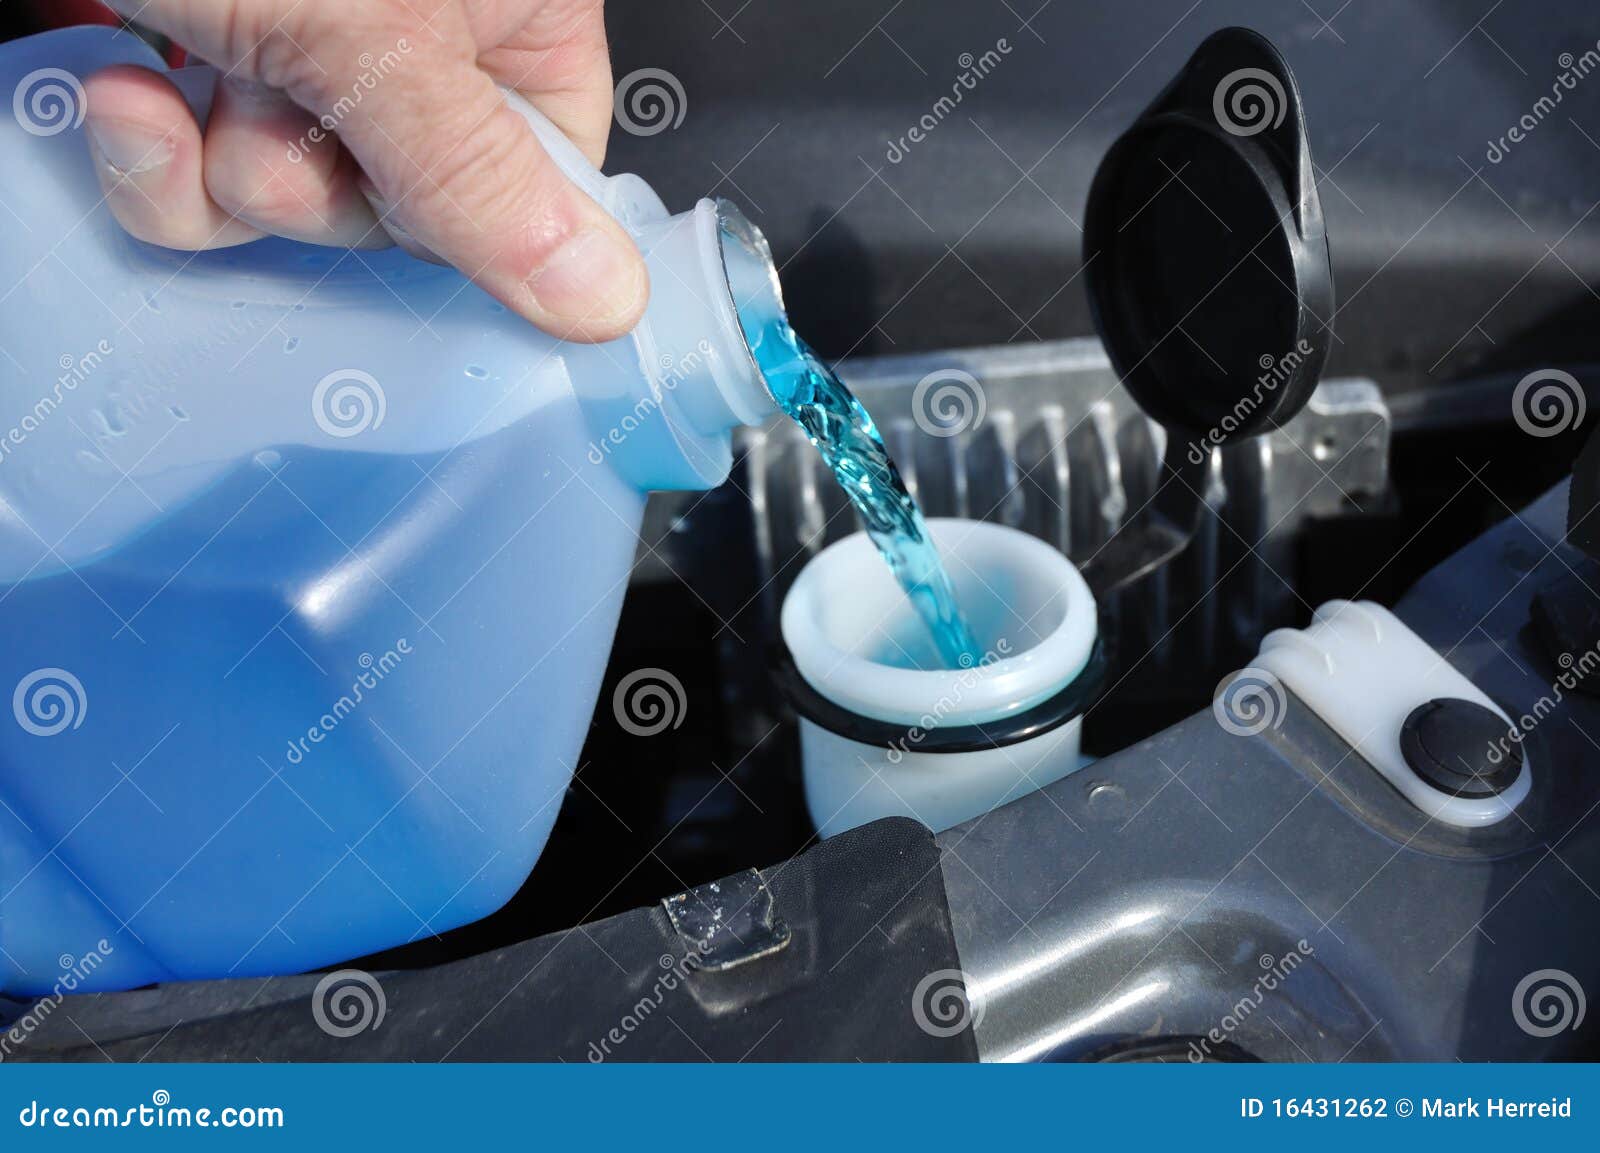 filling the windshield washer fluid